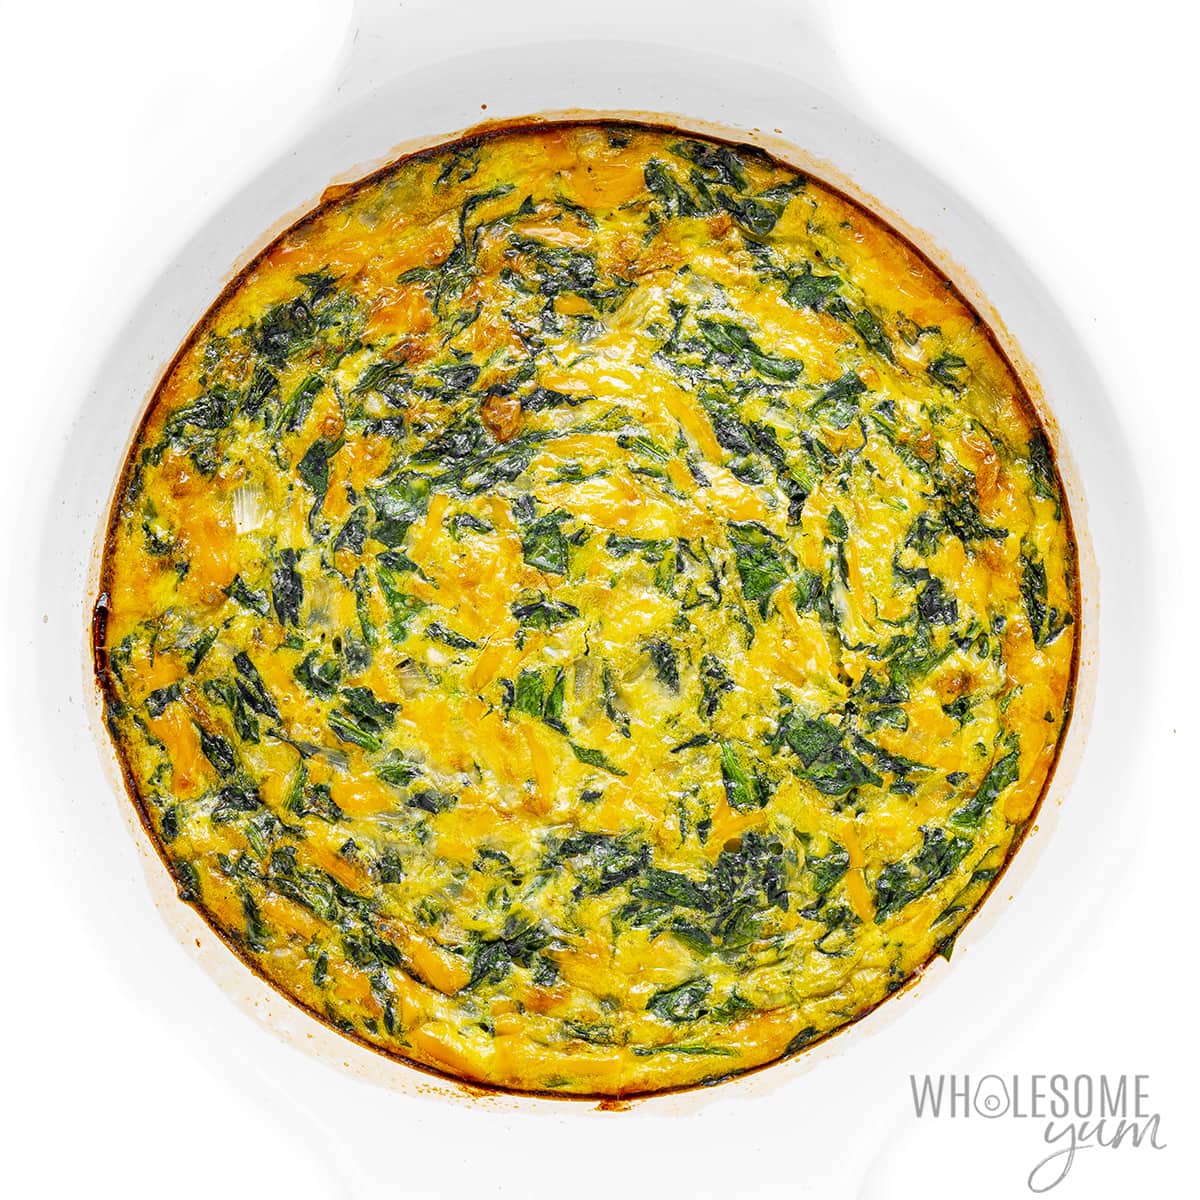 Baked crustless spinach quiche in baking dish.